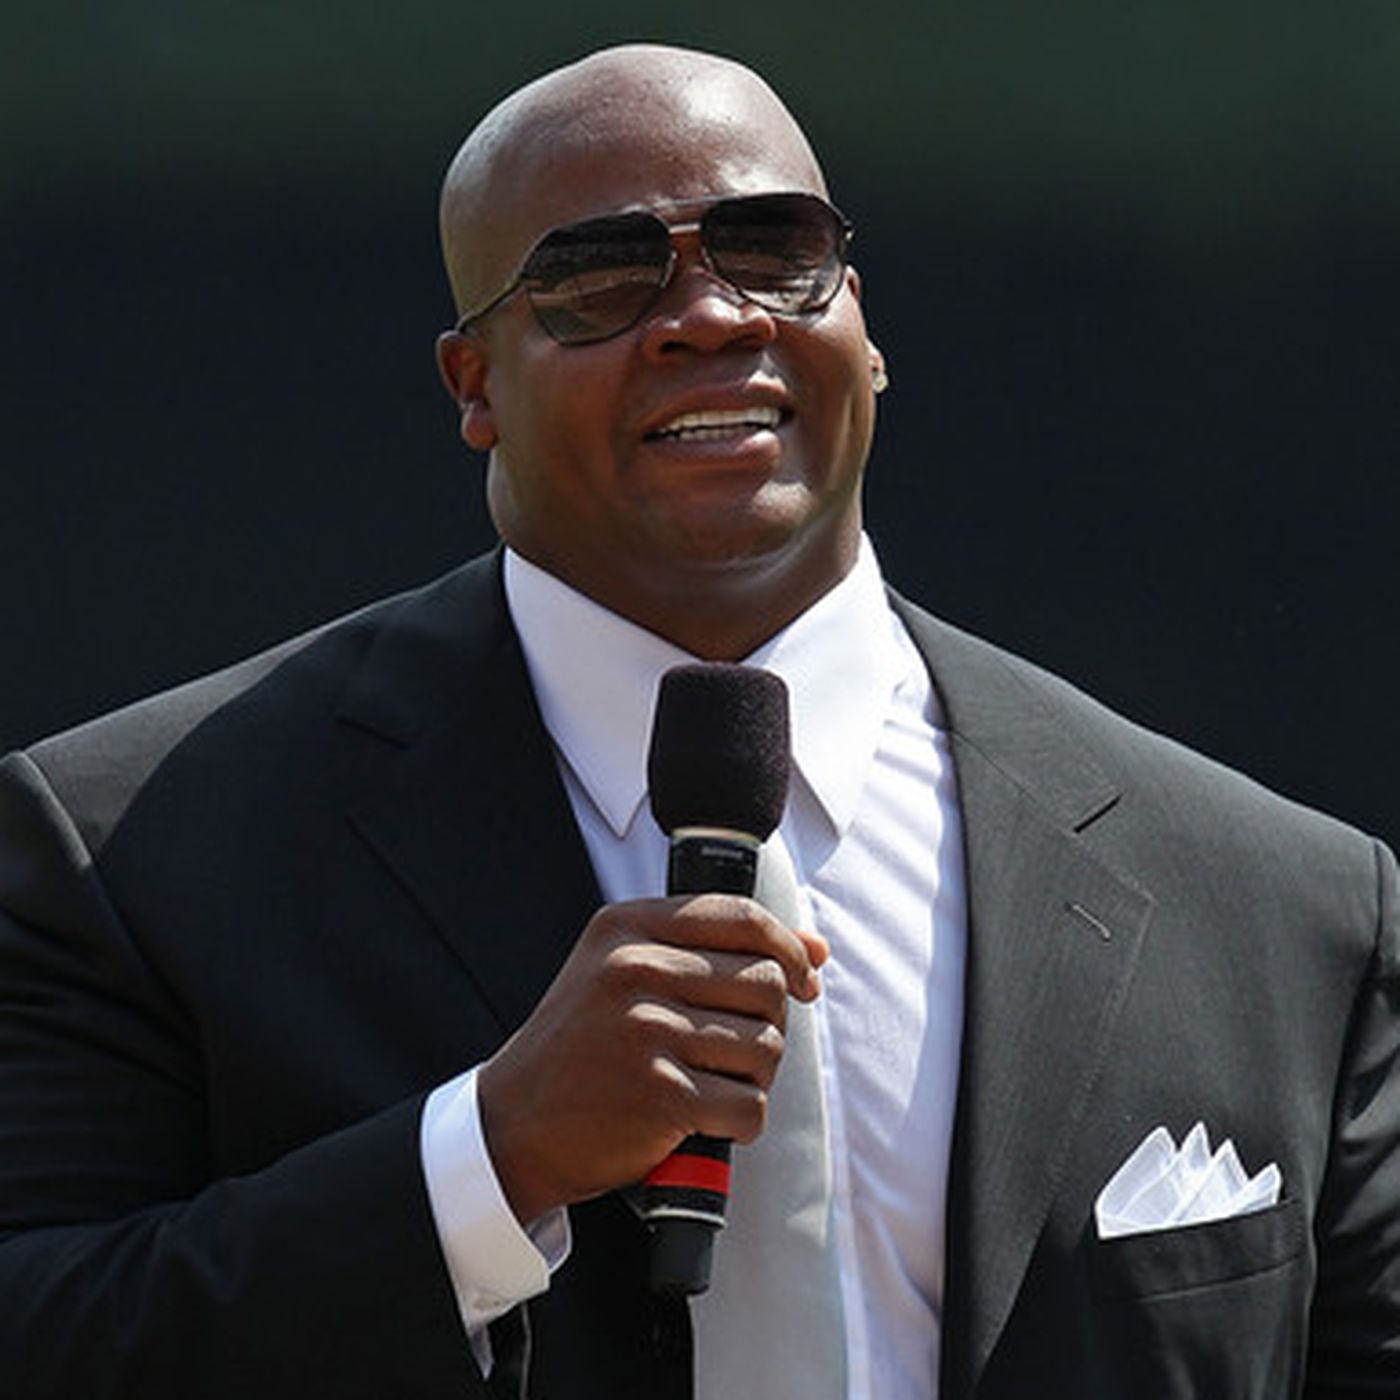 SoxFest Day 2 recap: Frank Thomas states his Hall of Fame case ...